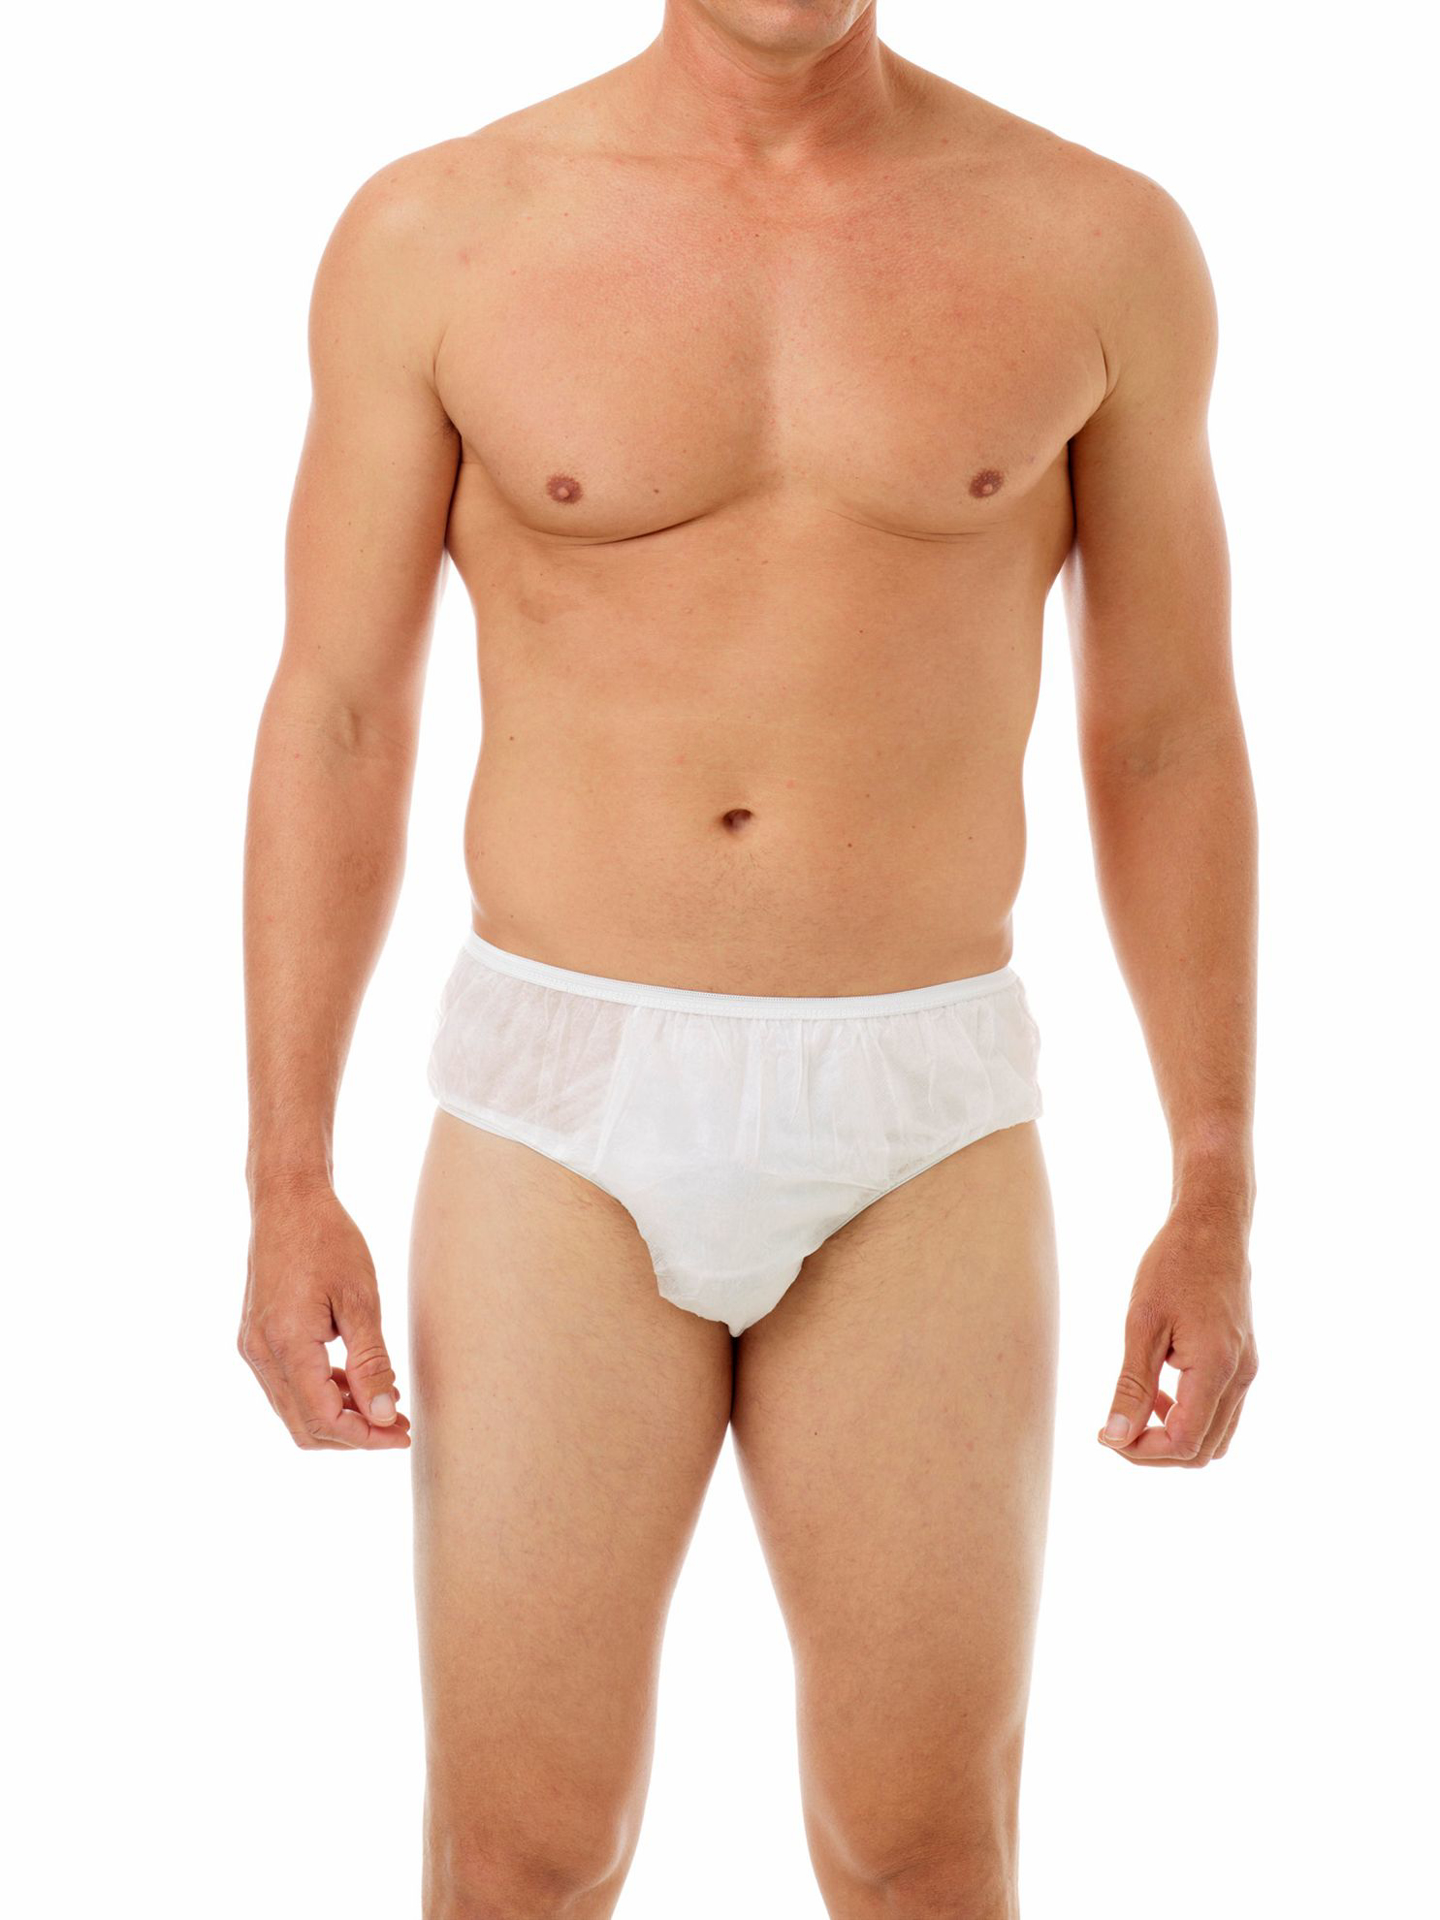 Mens Disposable 100% Cotton Underwear - For Travel- Hospital Stays